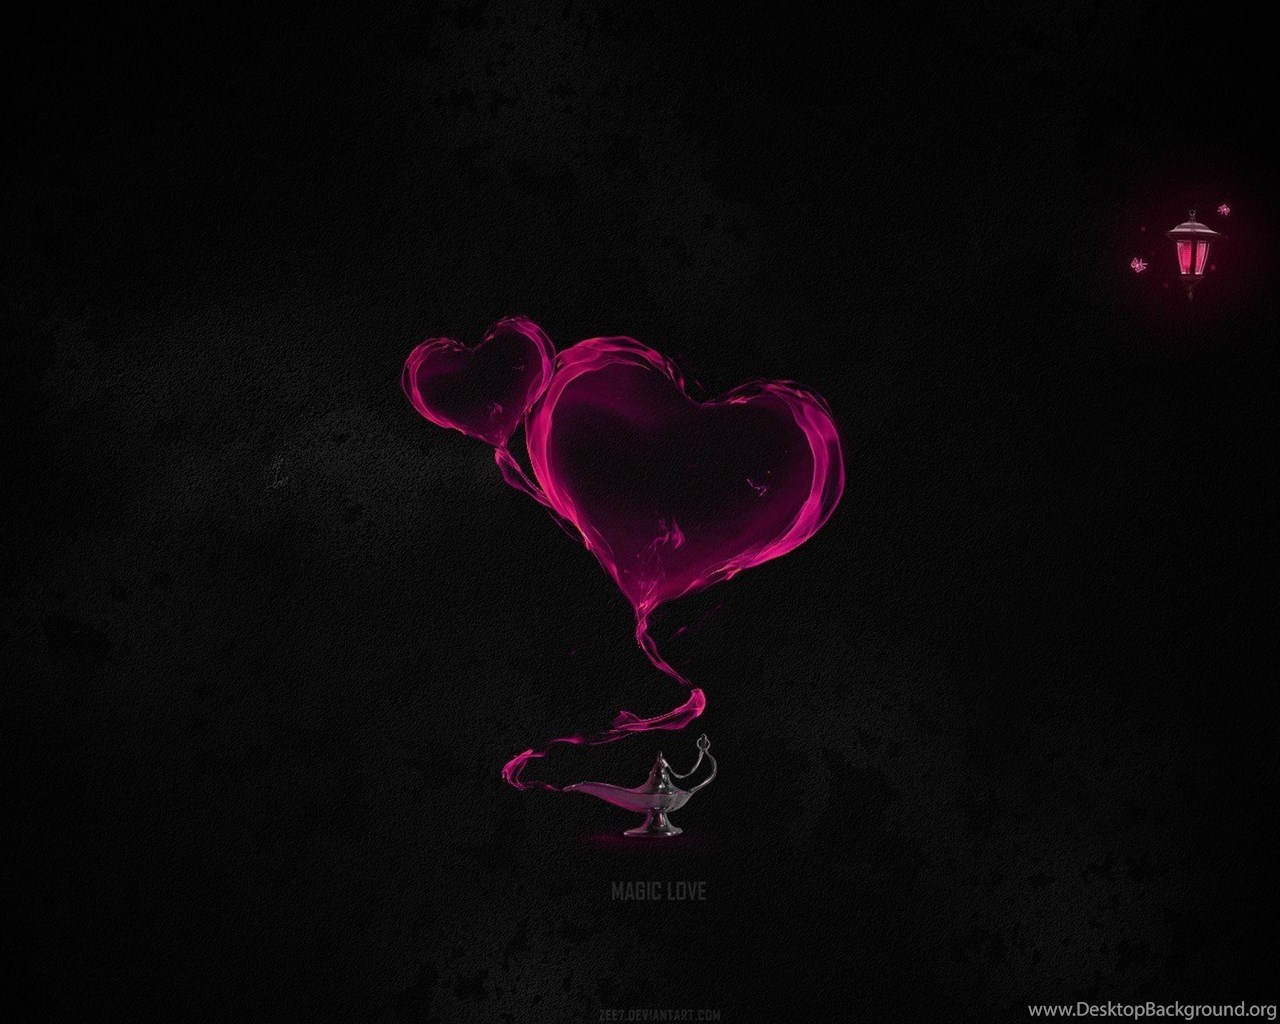 Abstract, Love, Heart, Black Backgrounds HD Wallpapers Desktop Background